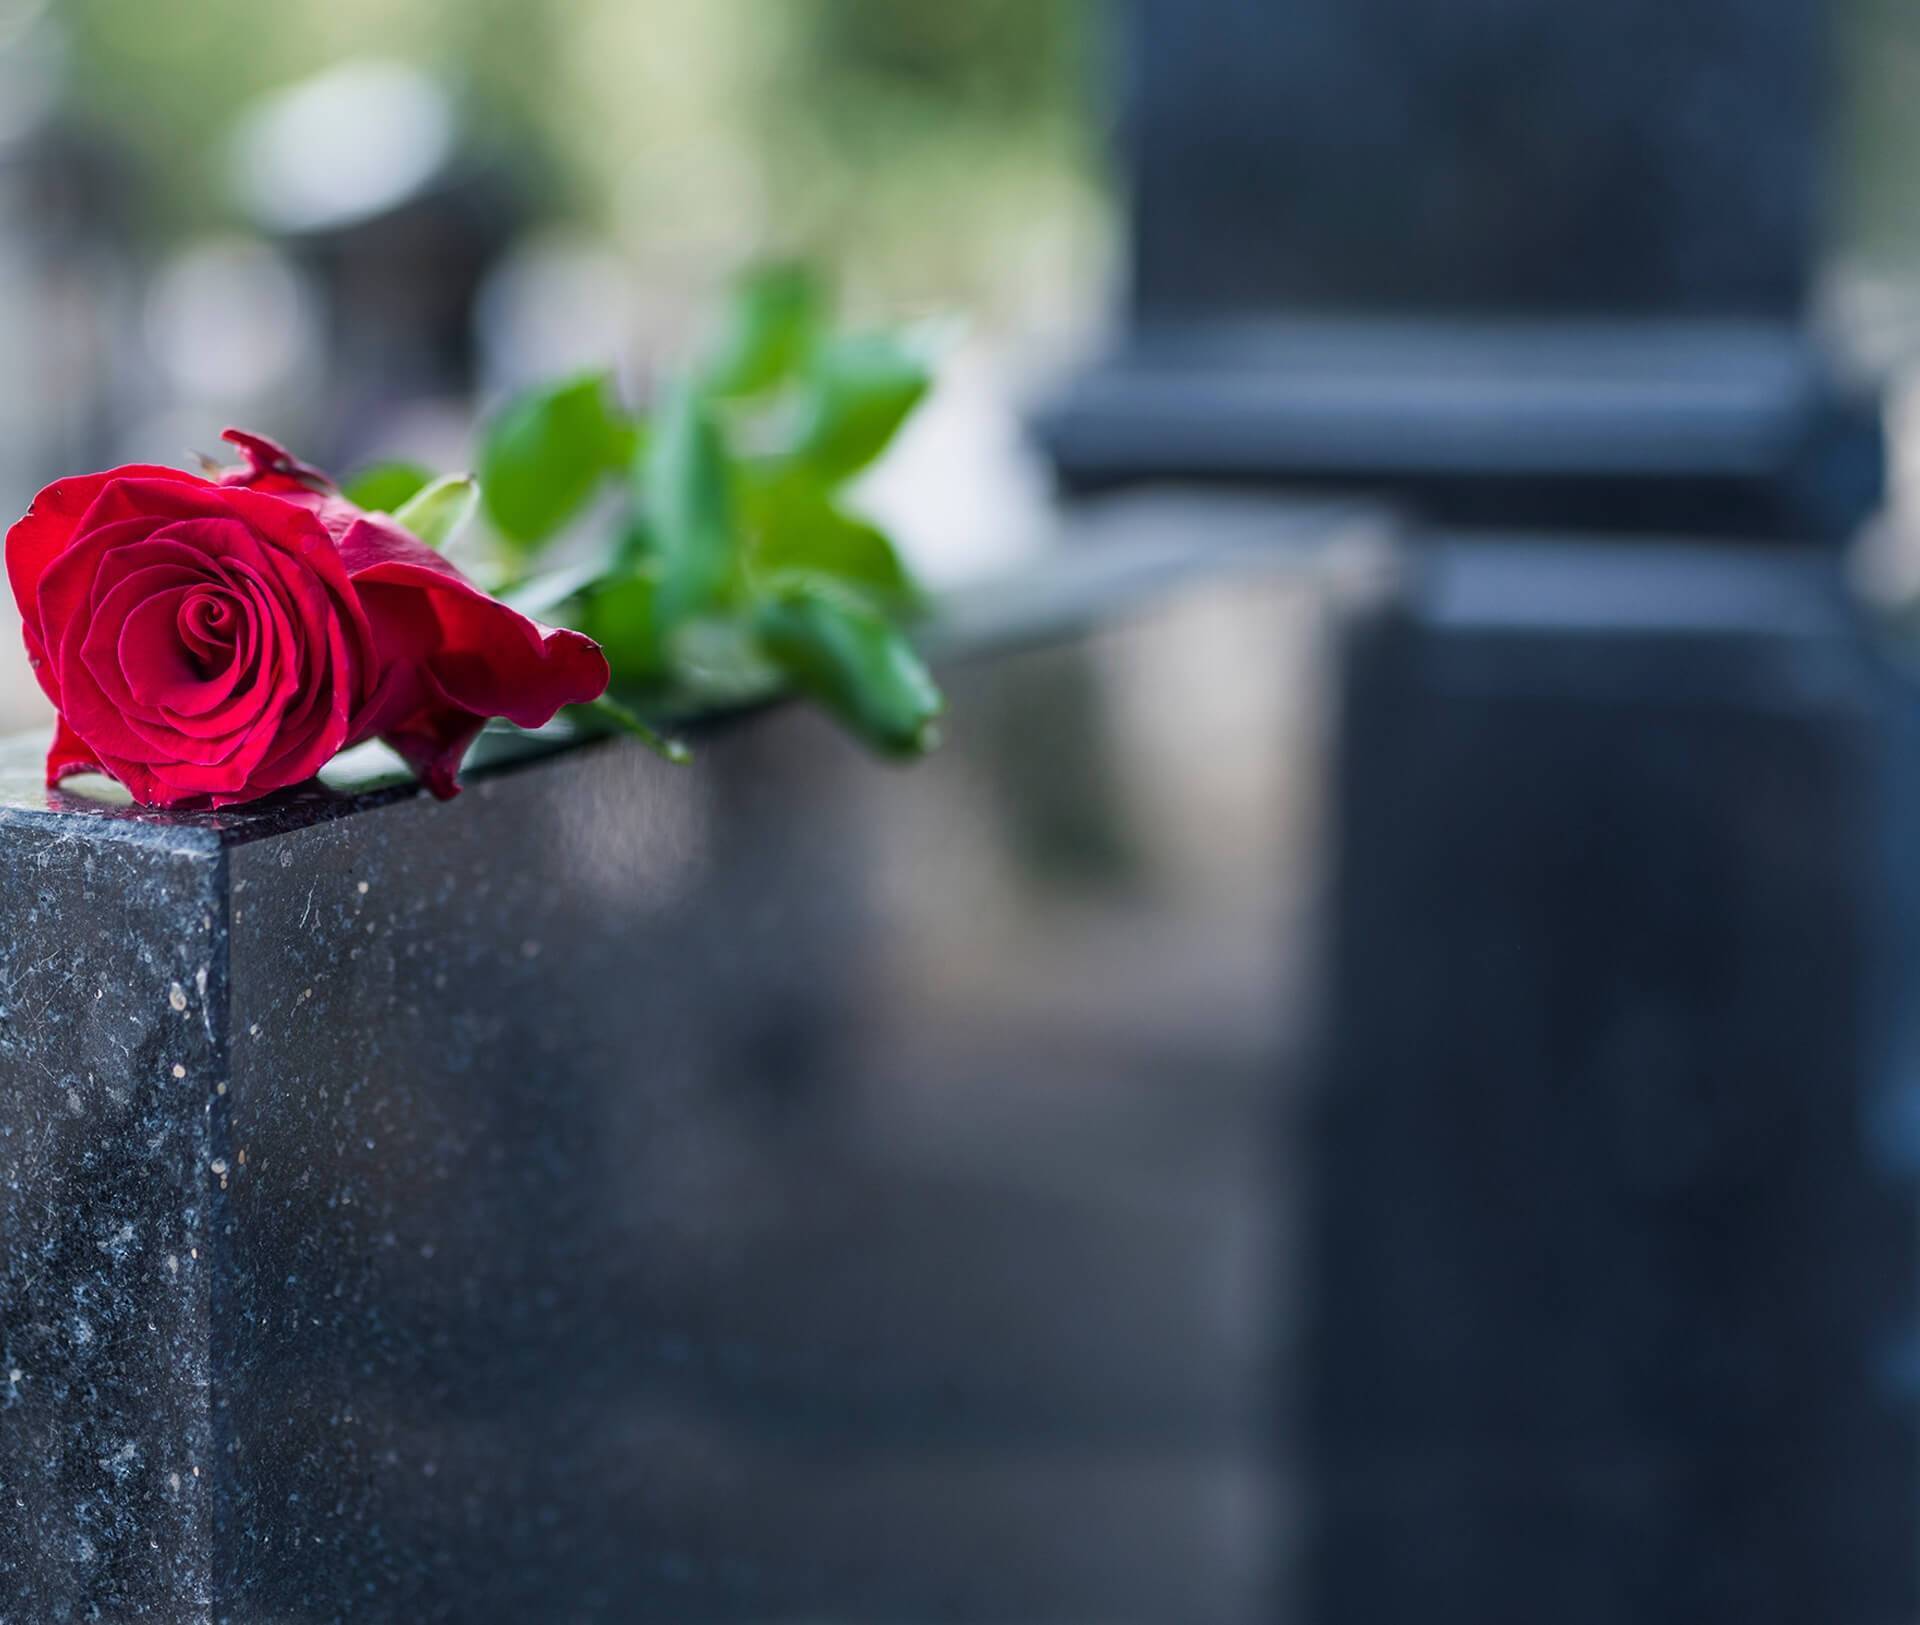 Tombstone cleaning and maintenance